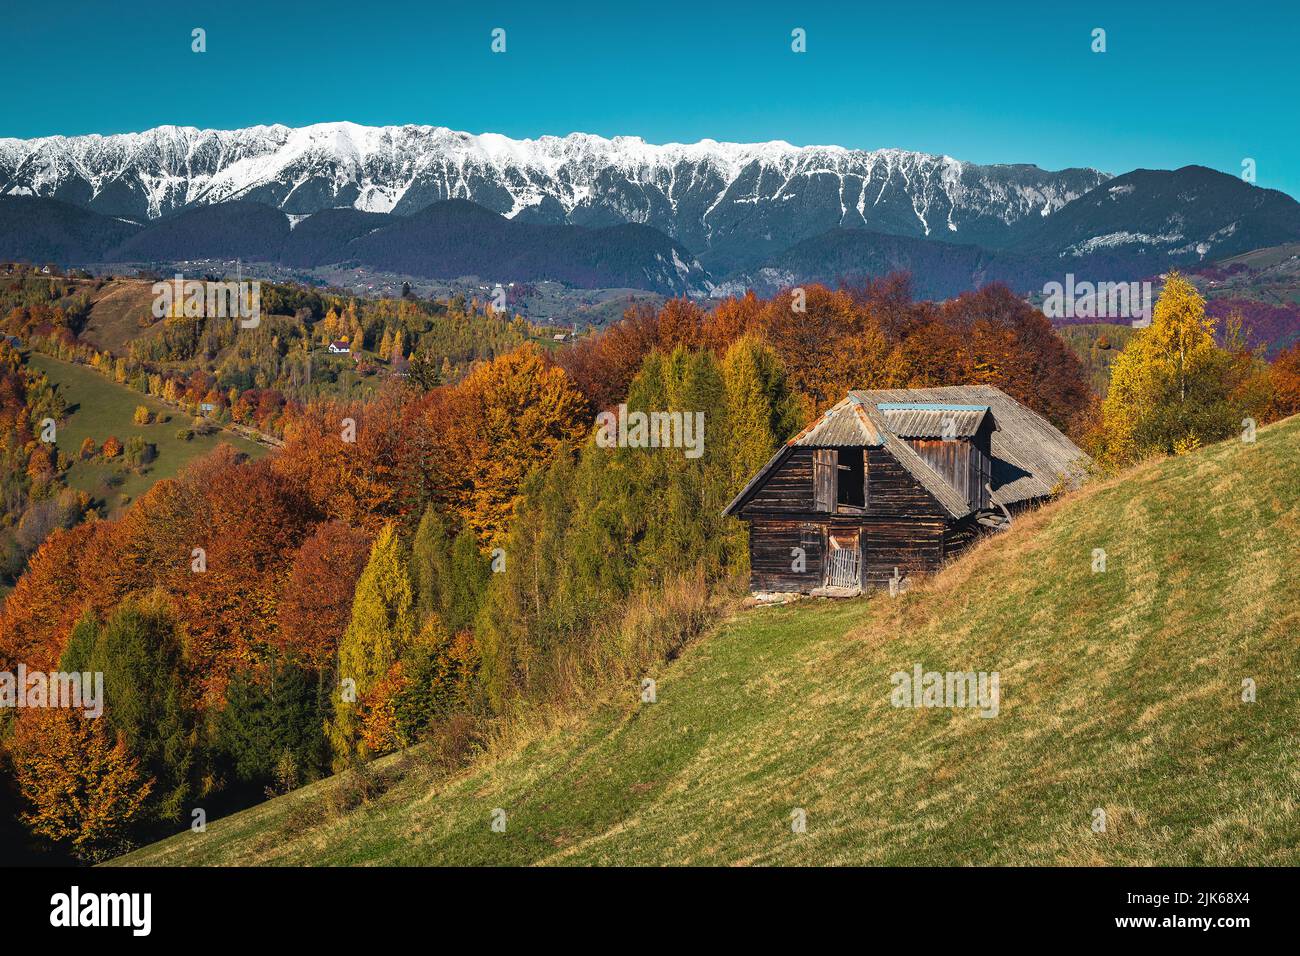 Majestic autumn scenery and colorful deciduous forest on the hills. Colorful forest on the slope and snowy mountains in background, Piatra Craiului mo Stock Photo